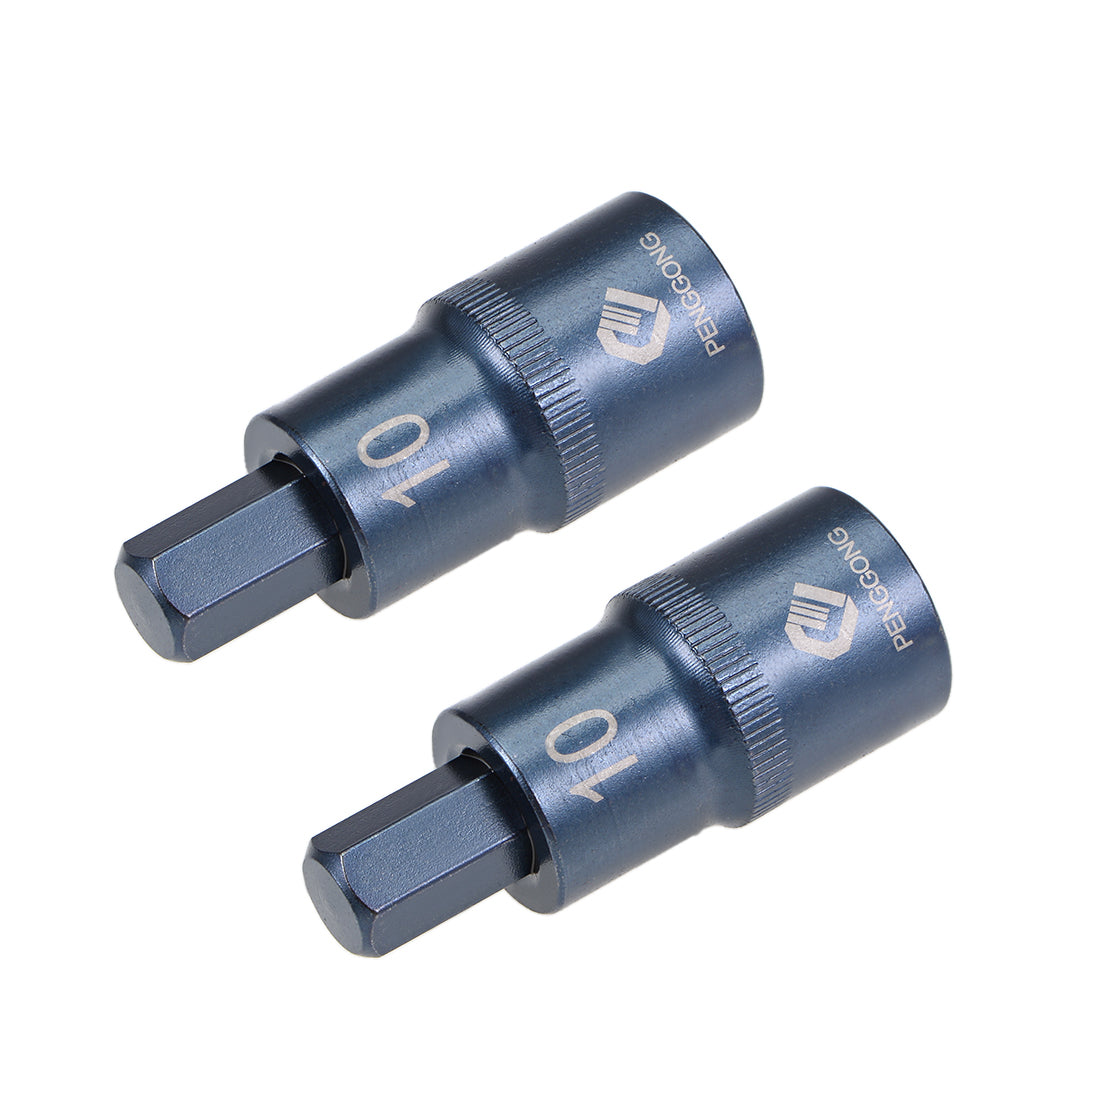 uxcell Uxcell Drive x Hex Bit Socket, S2 Steel Bits, CR-V Sockets Metric (For Hand Use Only)